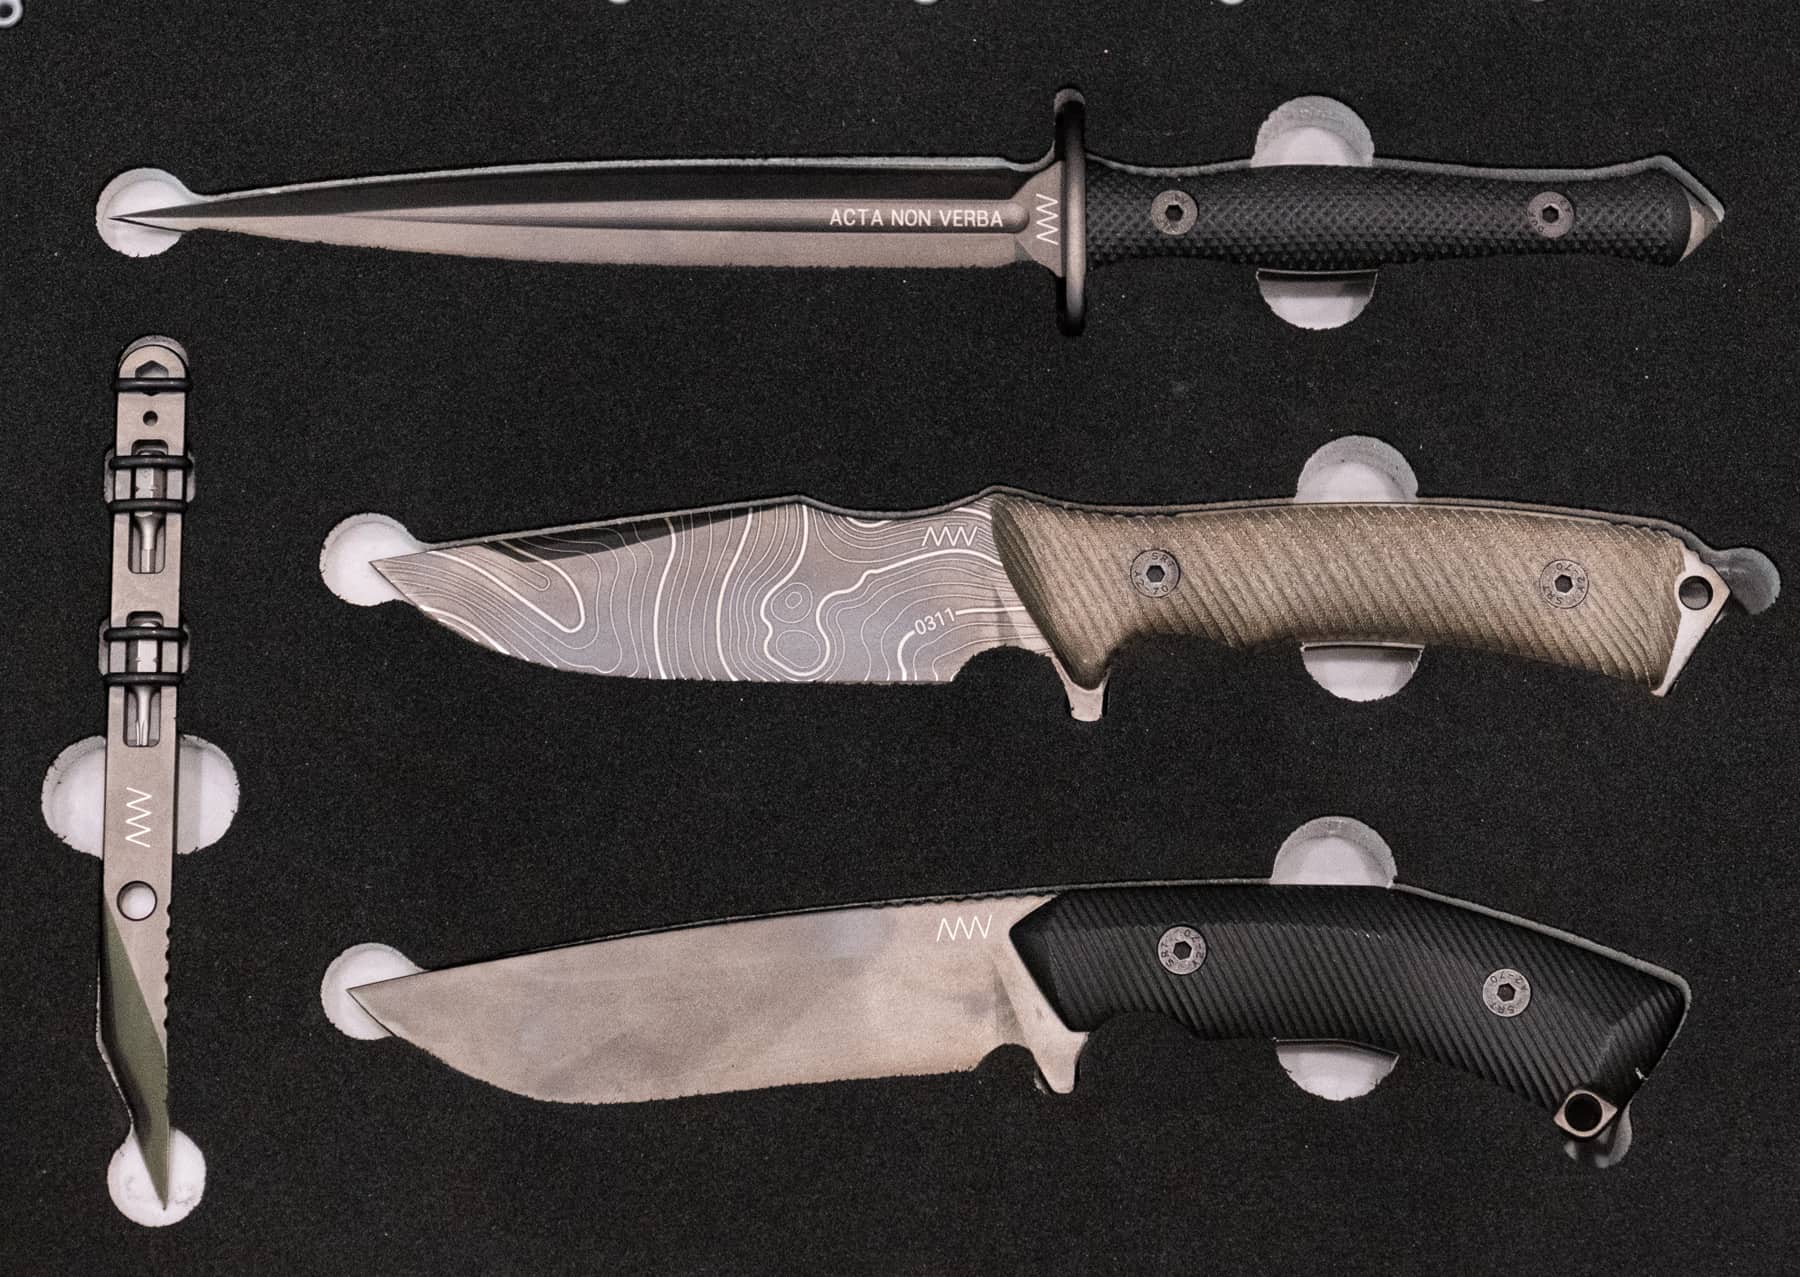 Acta Non Verba fixed blades are used by special forces and outdoor enthusiasts. 